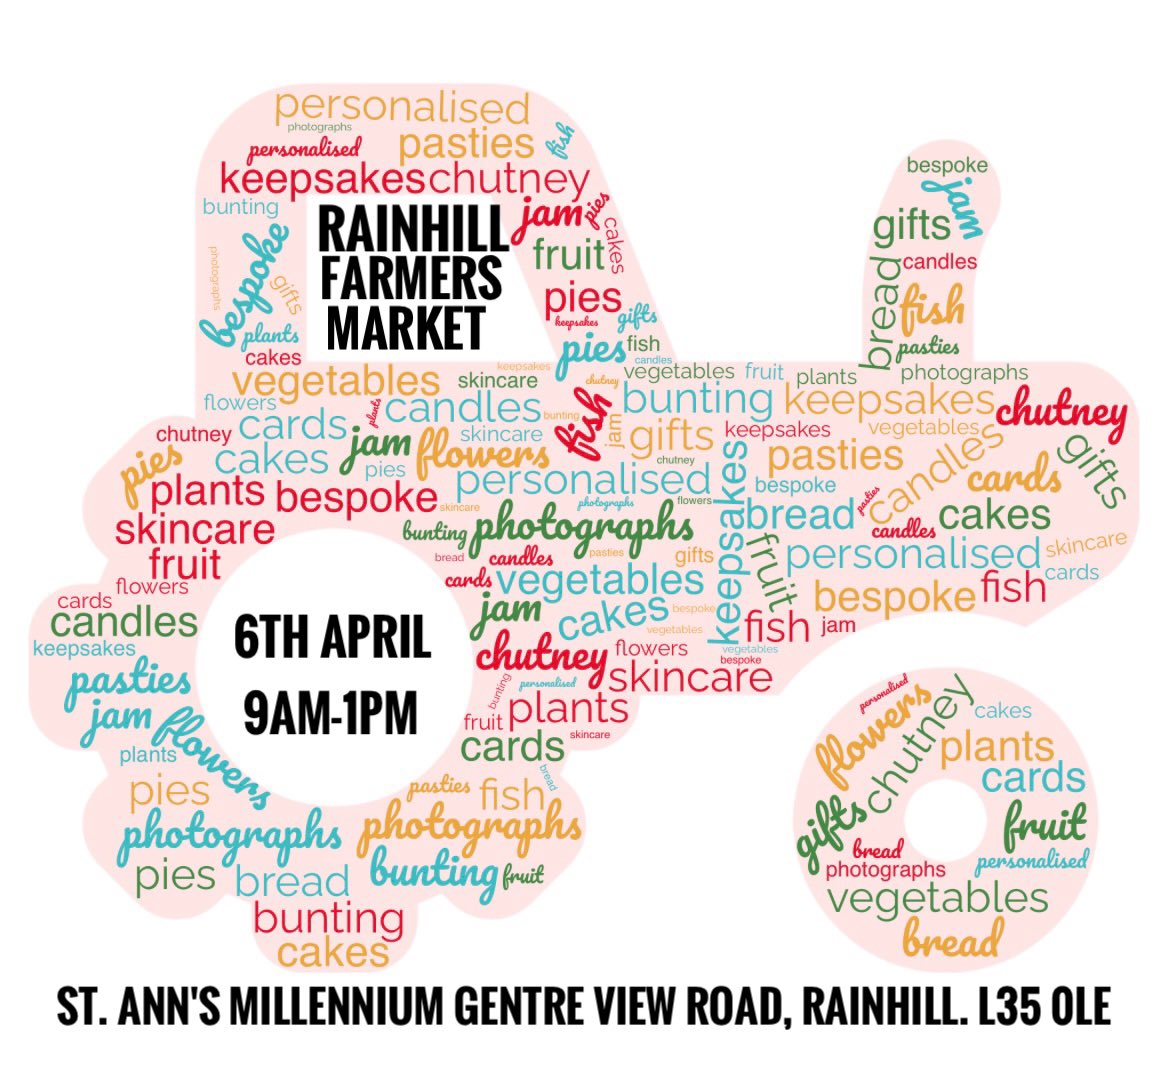 This Saturday is the Rainhill Farmers Market with Artisan Gifts and Food. Pop along and support some independent businesses and have a wander into the village. 9am-1pm.